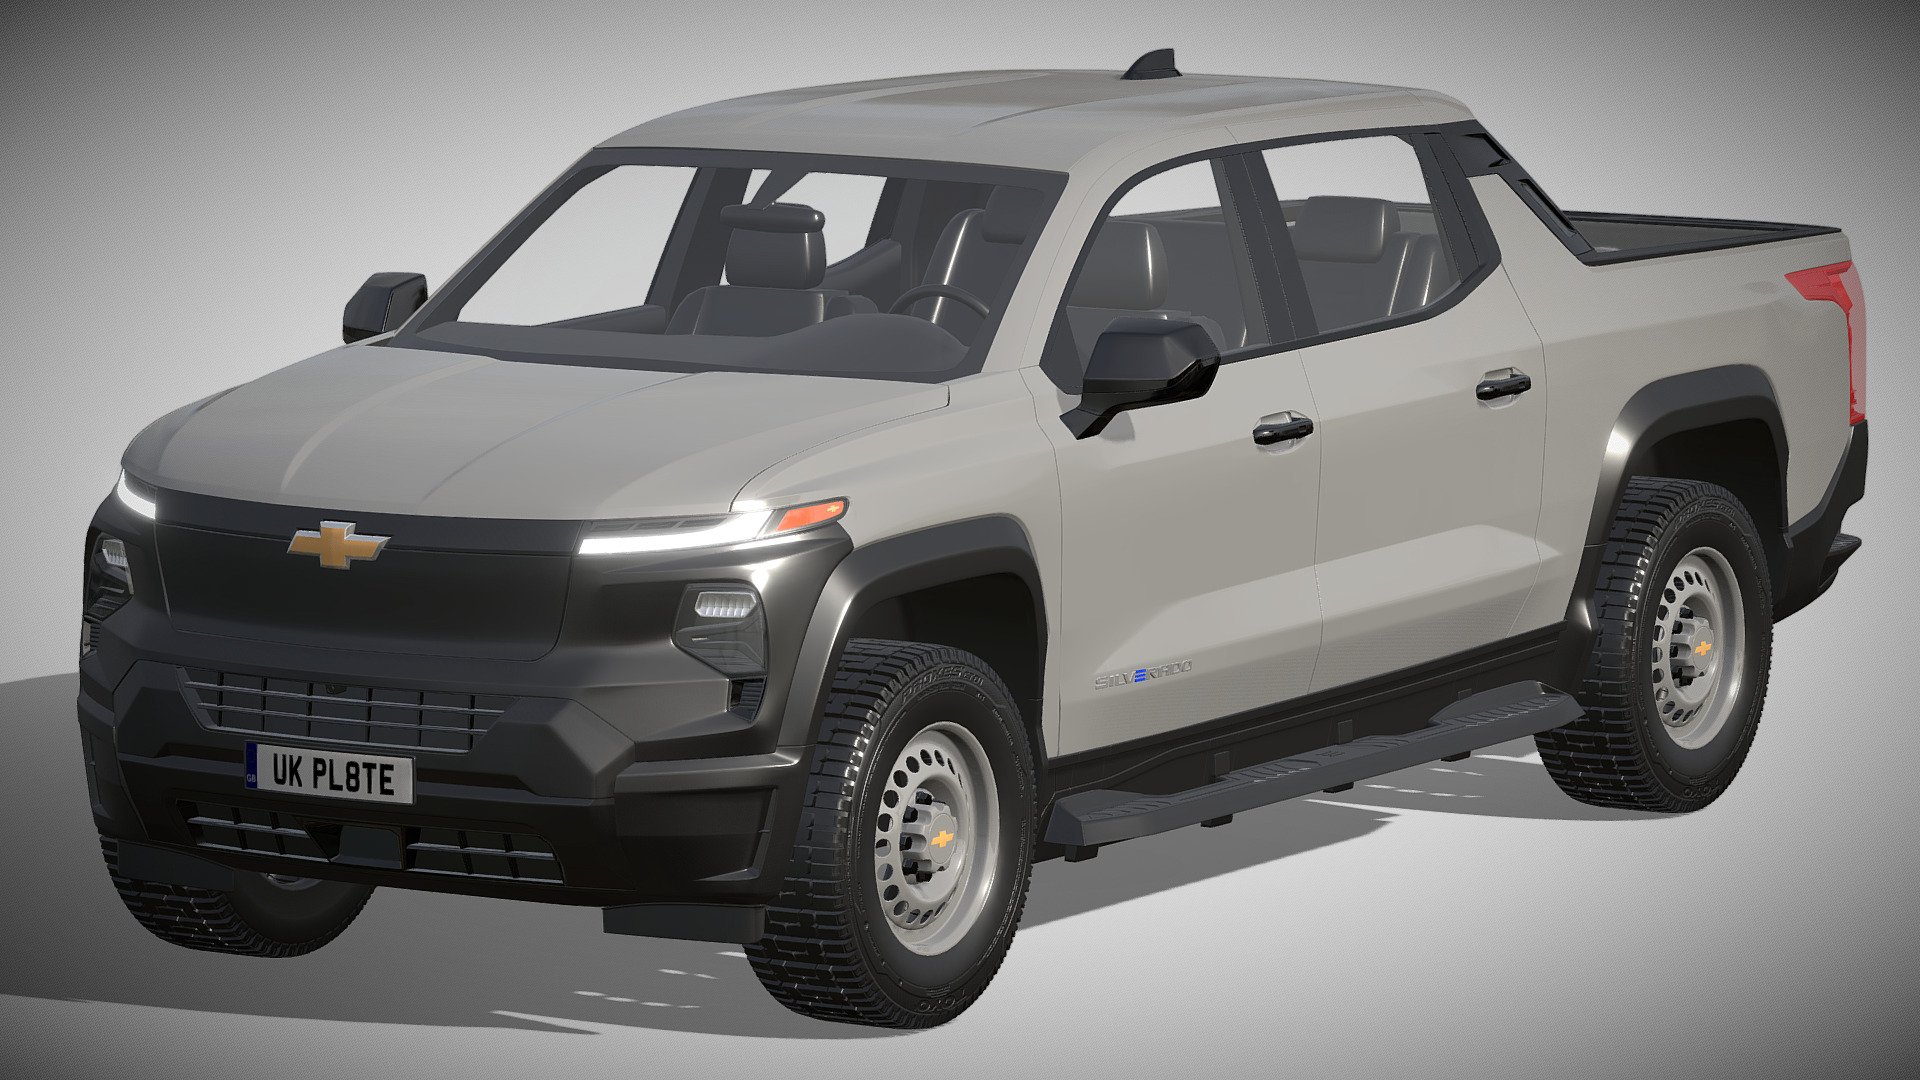 Chevrolet Silverado EV WT

https://www.chevrolet.com/electric/silverado-ev

Clean geometry Light weight model, yet completely detailed for HI-Res renders. Use for movies, Advertisements or games

Corona render and materials

All textures include in *.rar files

Lighting setup is not included in the file! - Chevrolet Silverado EV WT - Buy Royalty Free 3D model by zifir3d 3d model